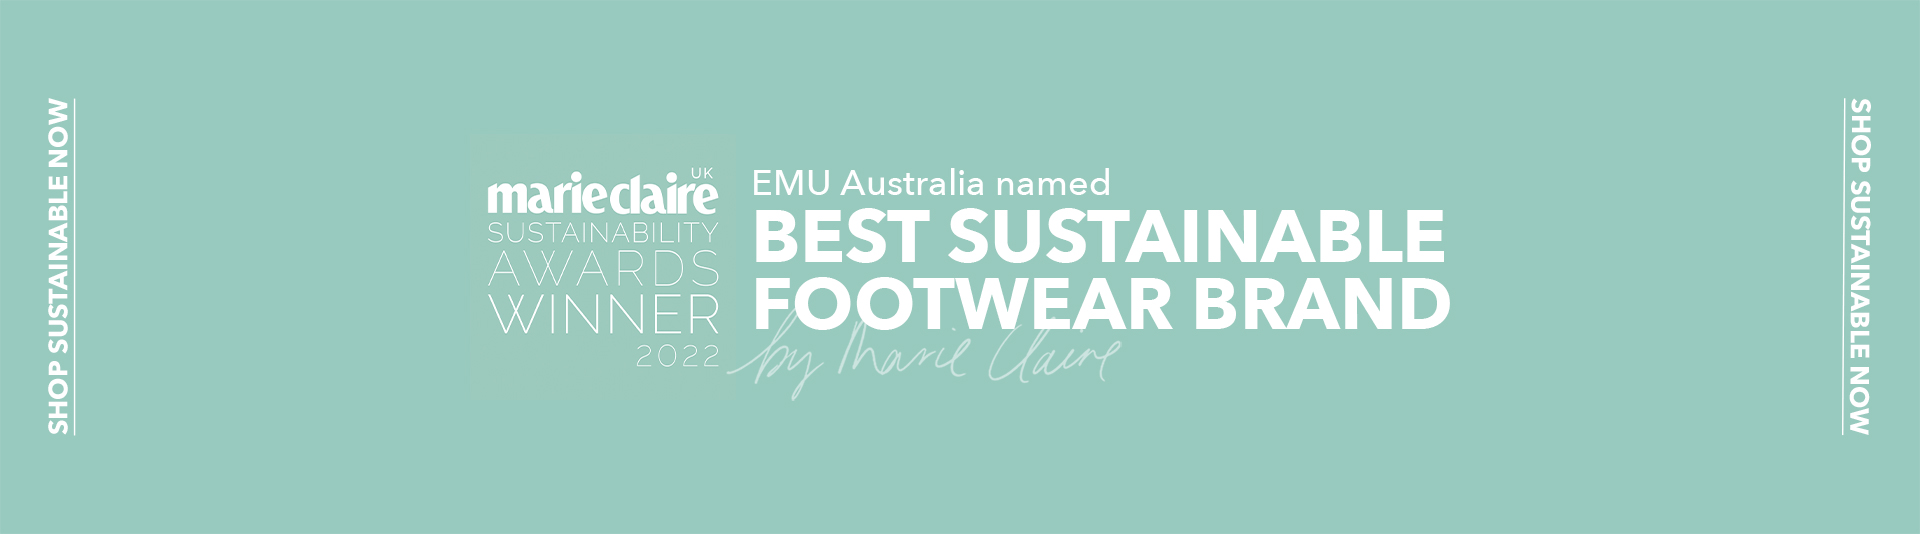 EMU Australia winner of Most Sustainable Footwear Brand by Marie Claire, Shop sustainable collection